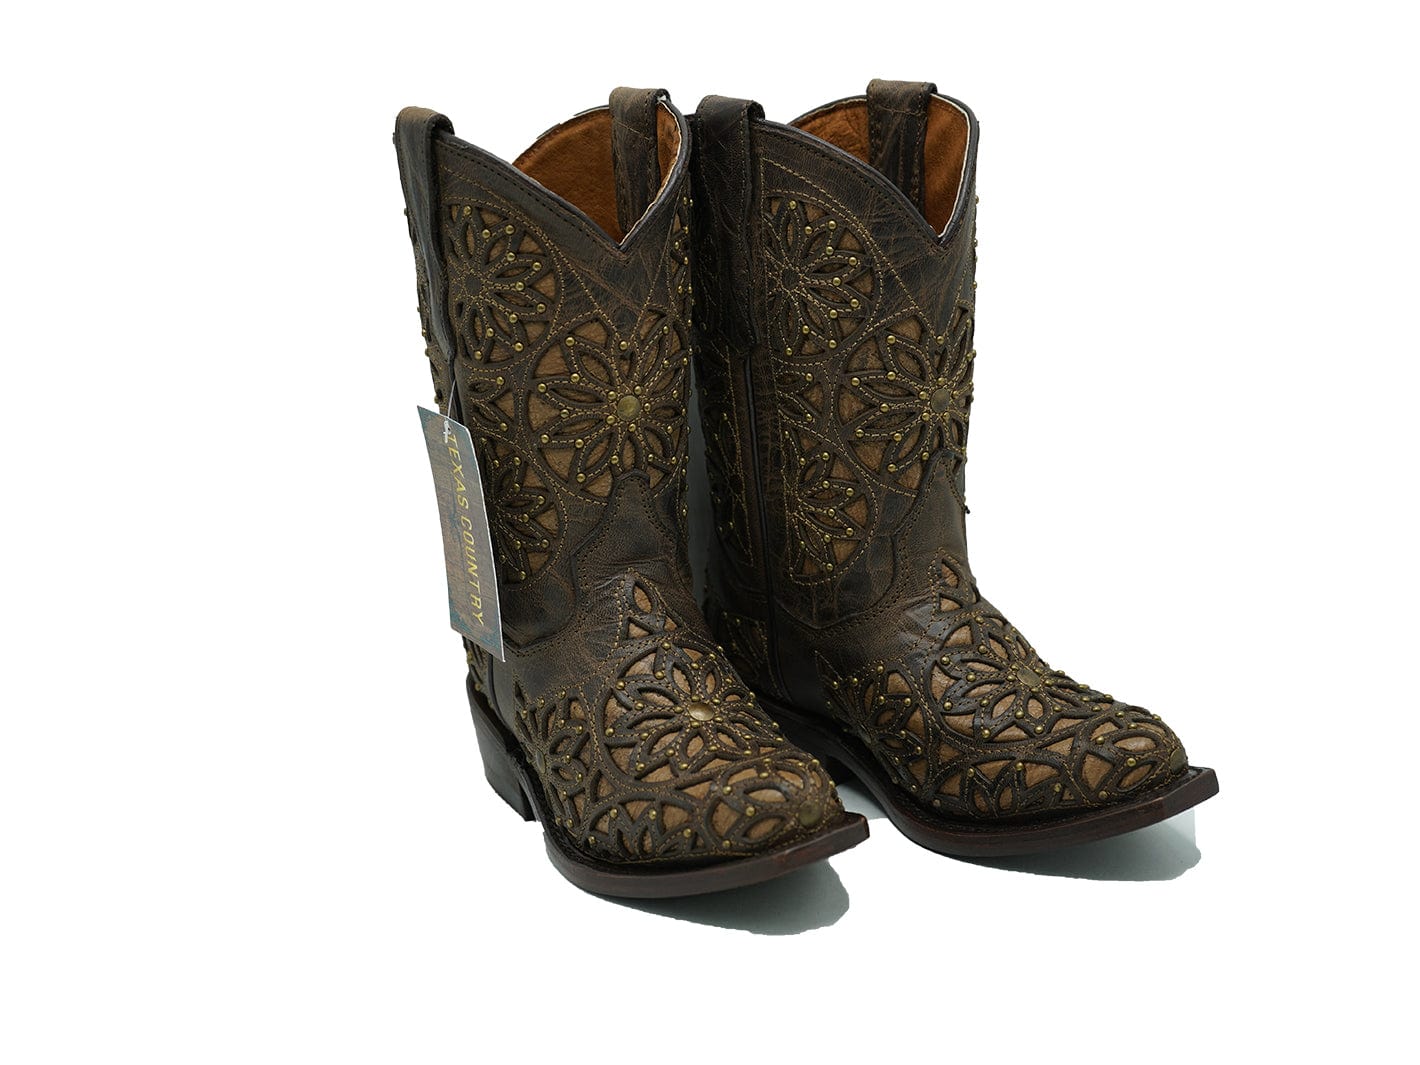 Texas Country Kids Western Girls Boots Cedro Tabaco 319N Vitralli